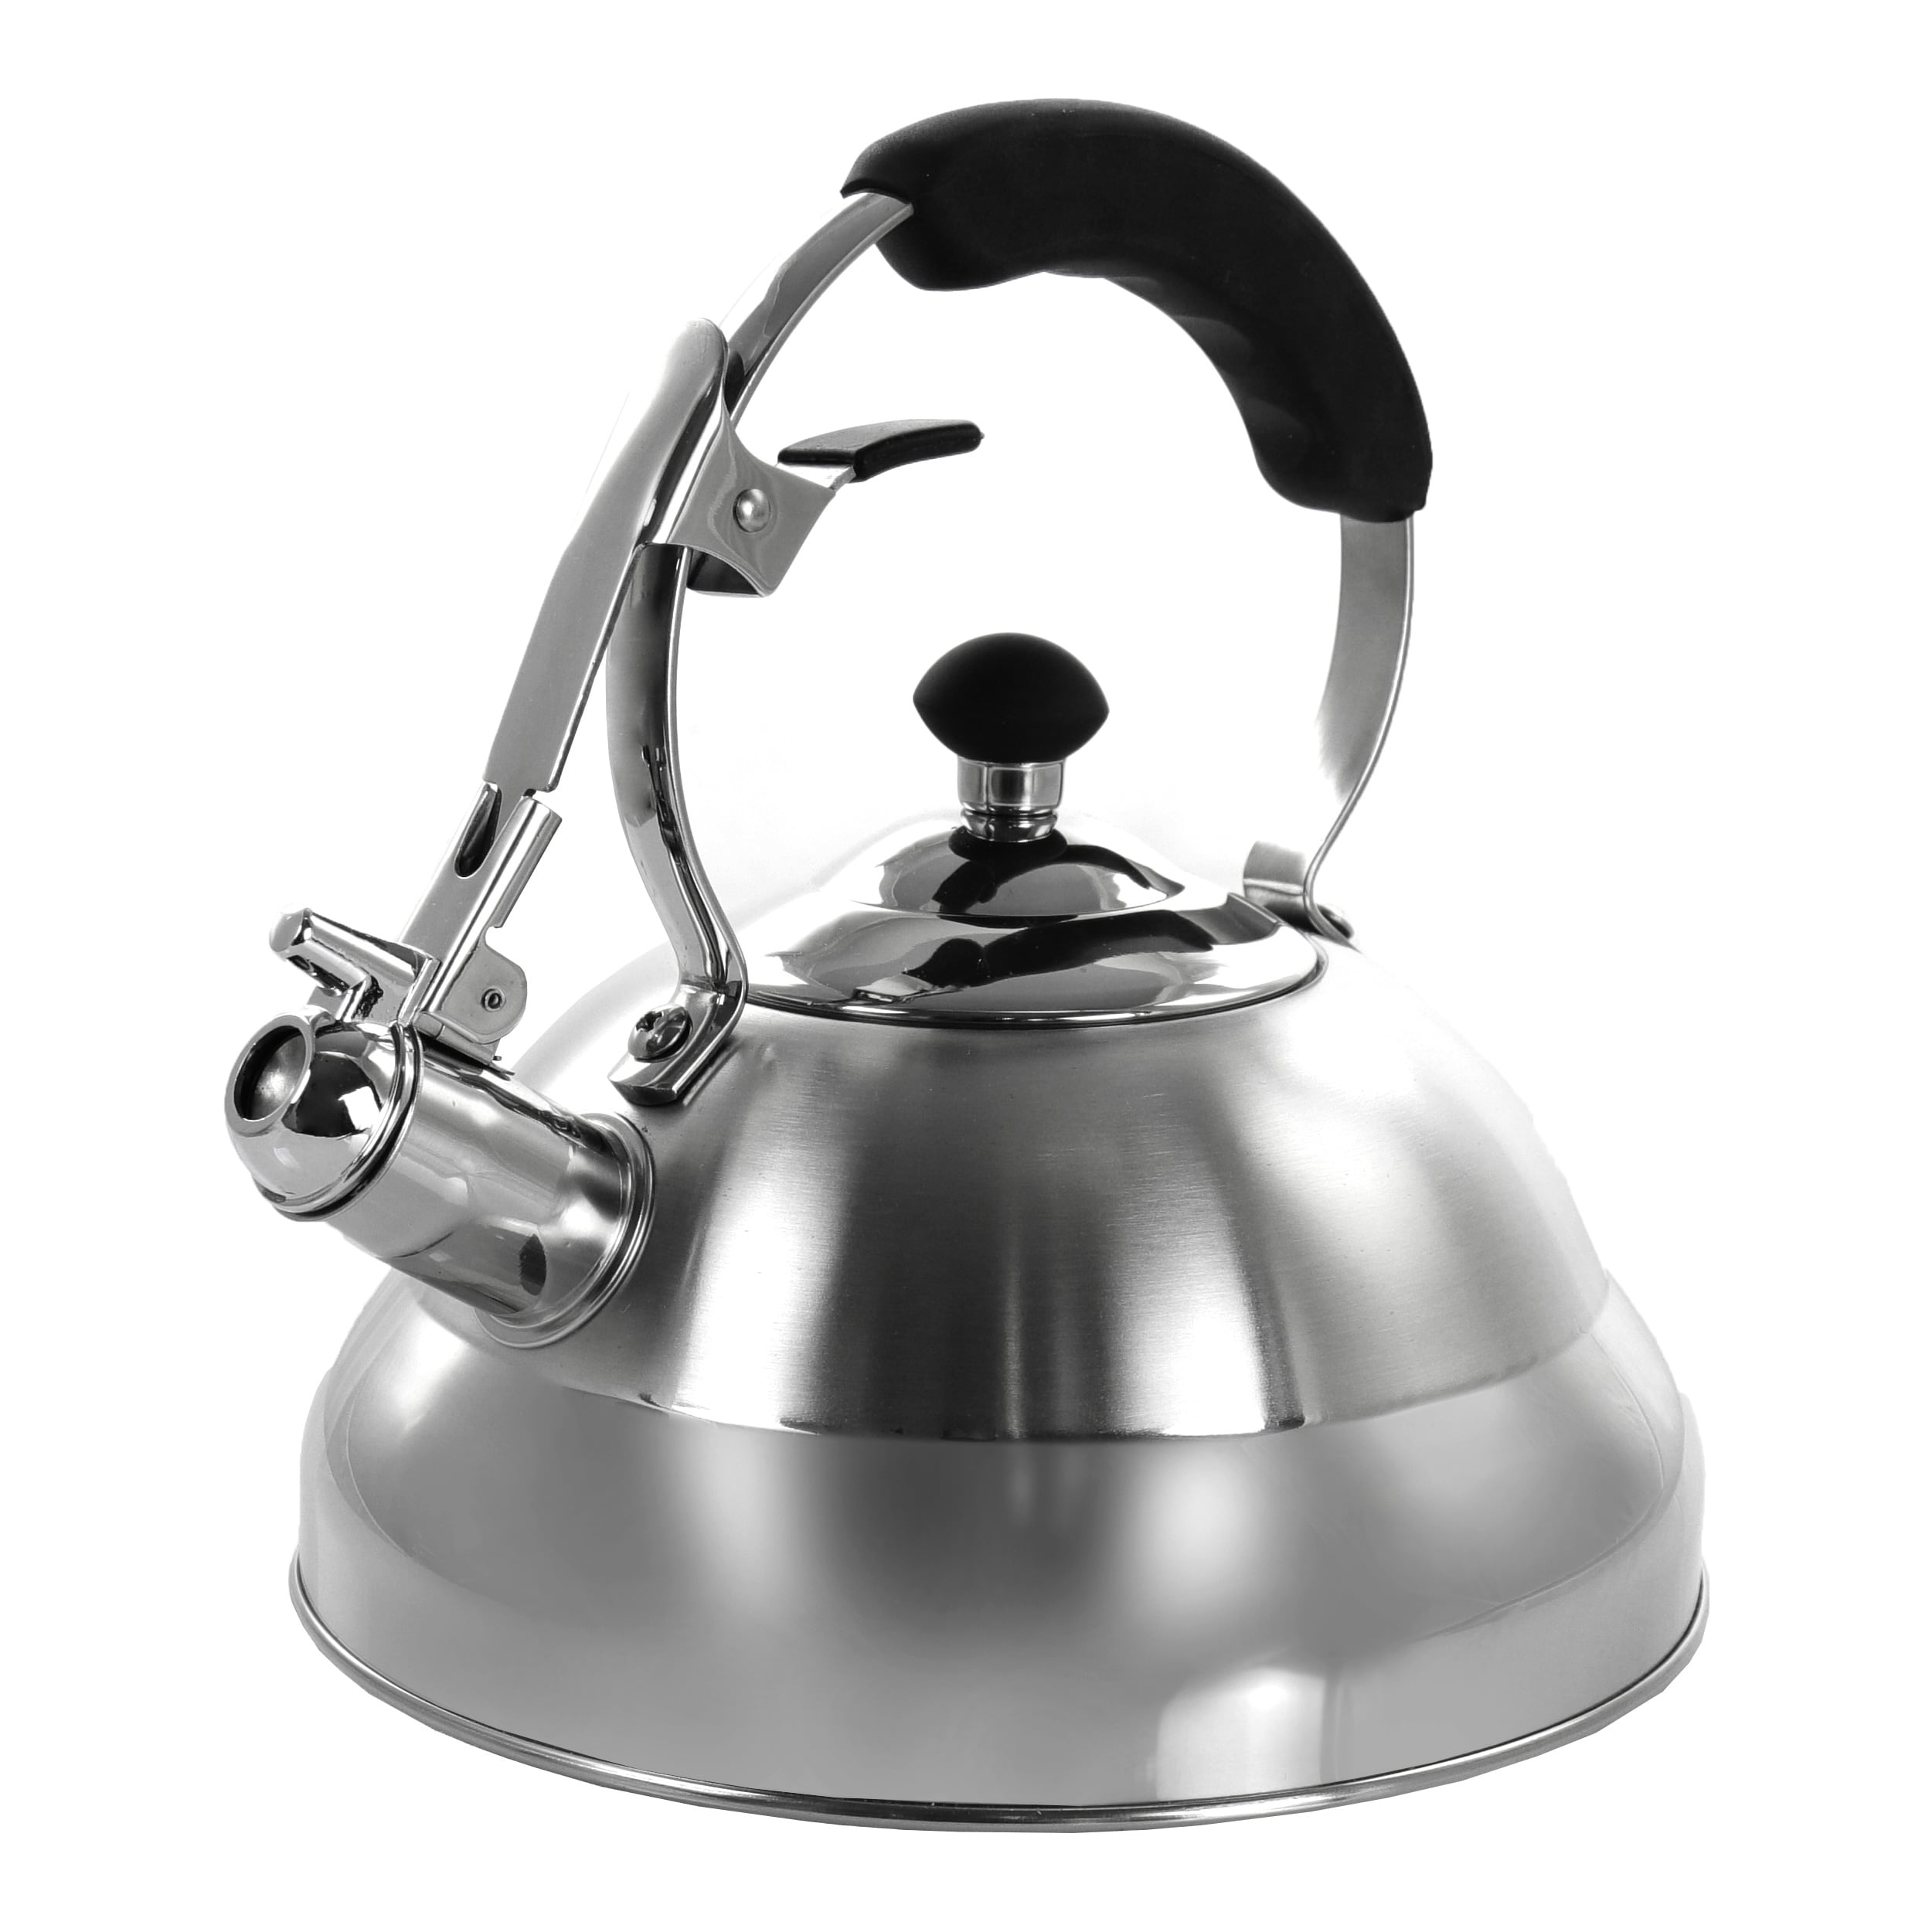 https://ak1.ostkcdn.com/images/products/is/images/direct/141af577f4a079ab708e8396ab8b62d9a55f9e78/MegaChef-2.7-Liter-Stovetop-Whistling-Kettle-in-Brushed-Silver.jpg